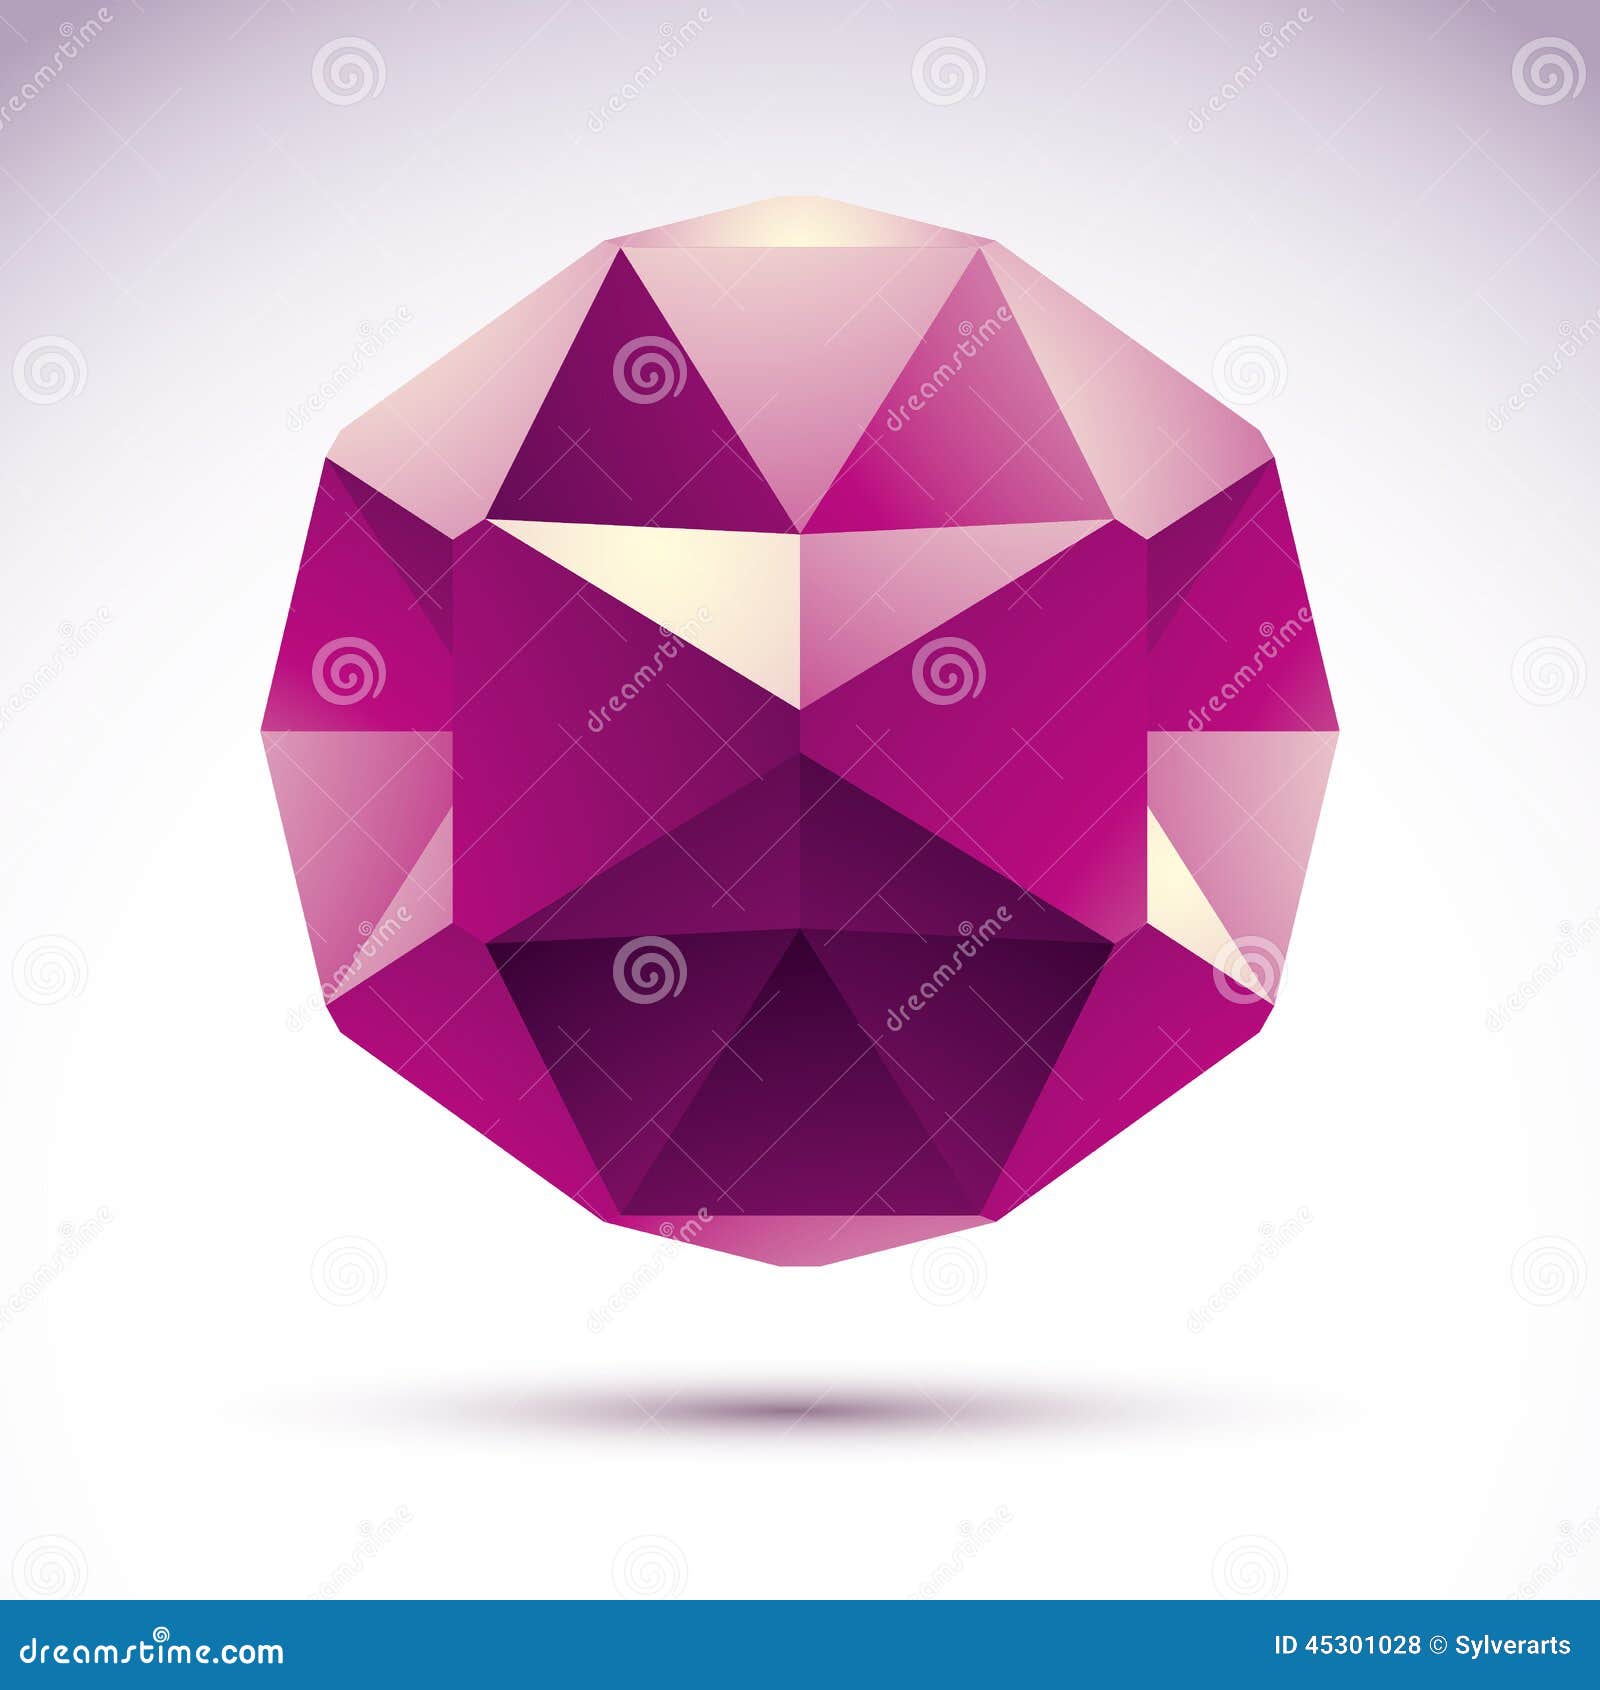 Vector Abstract 3D Object, Design Element, Technology Stock Vector - Illustration of design ...